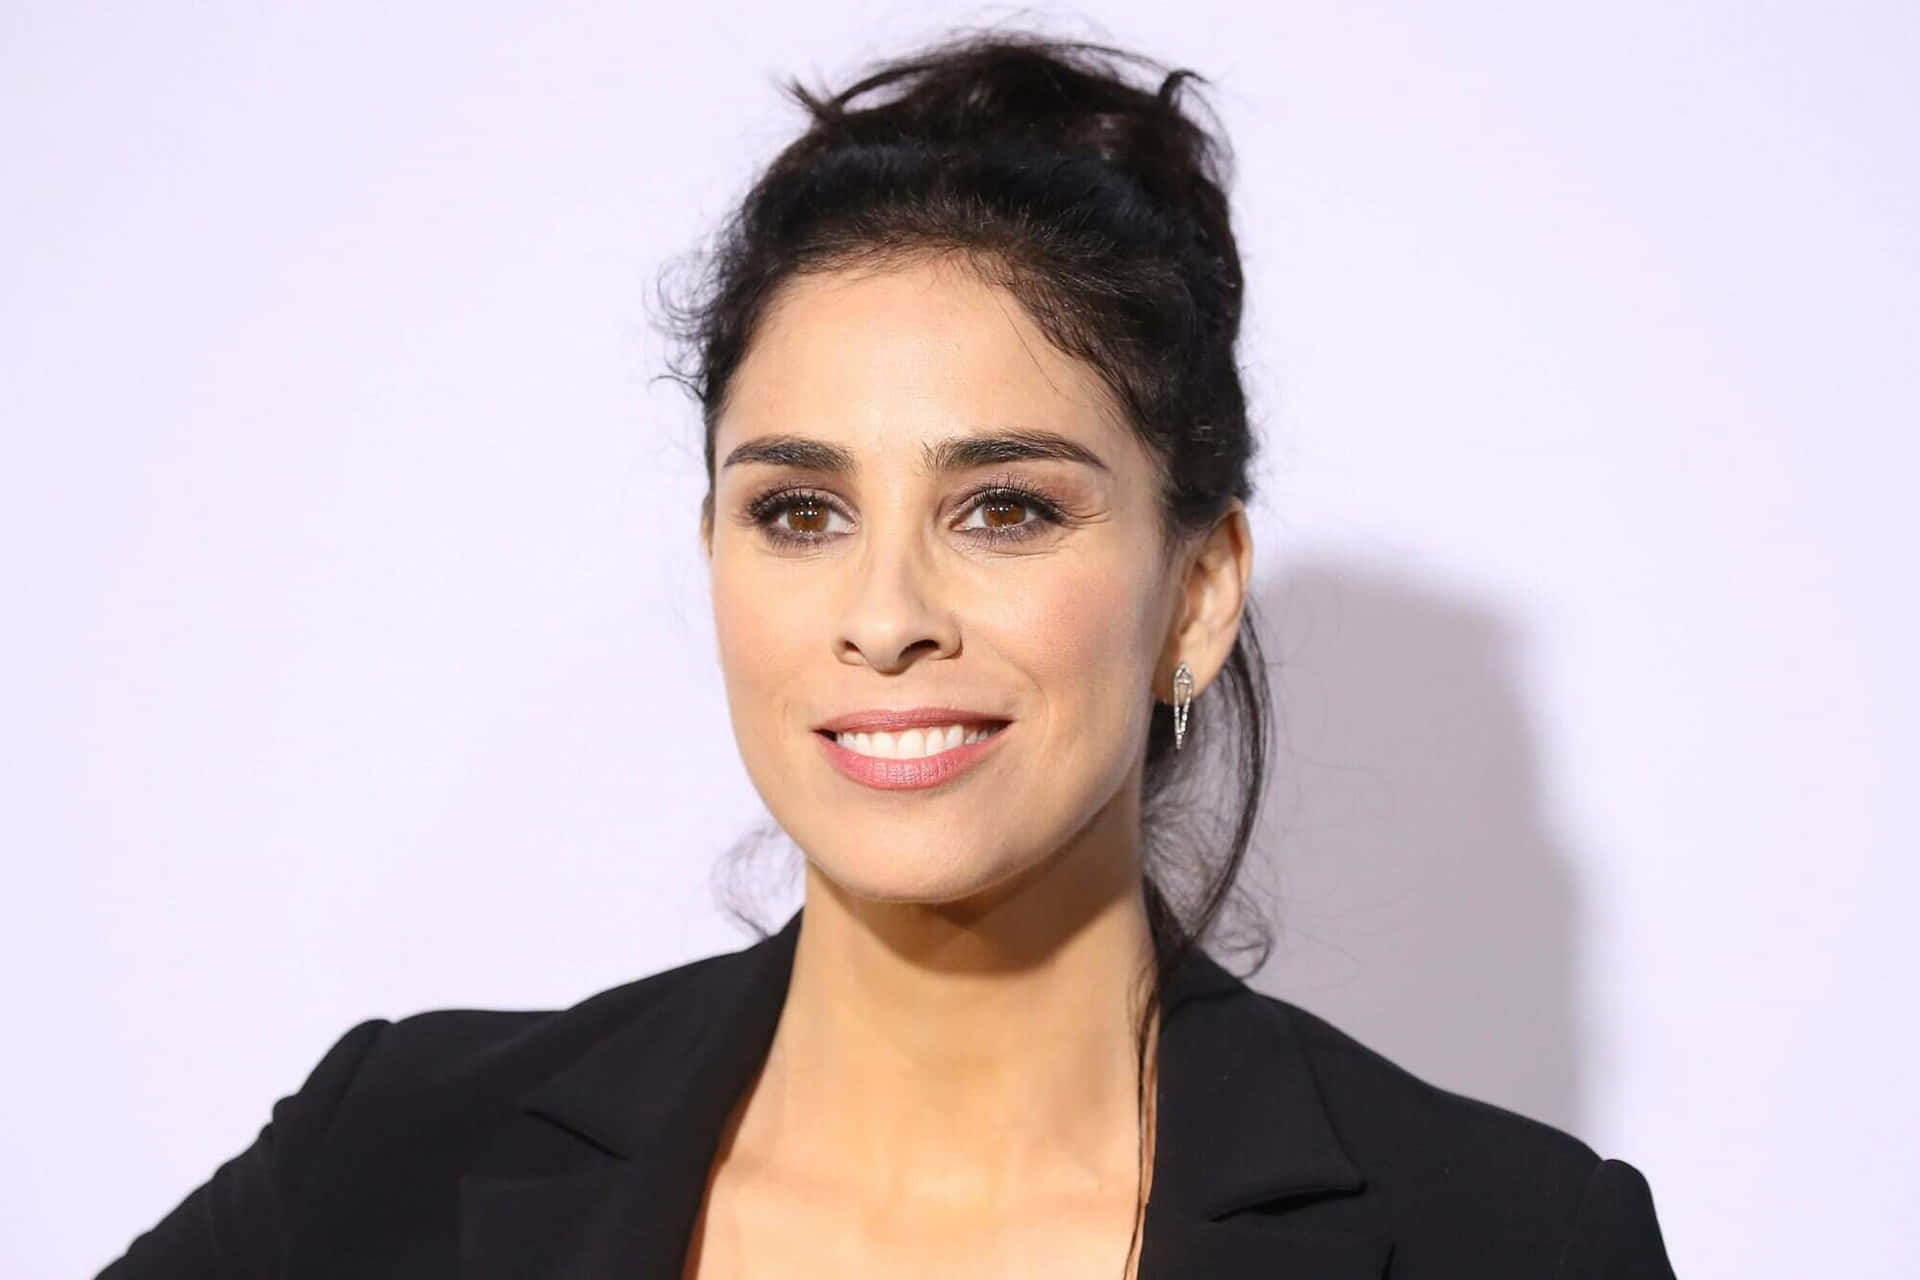 Sarah Silverman Smiling in a Stylish Look Wallpaper